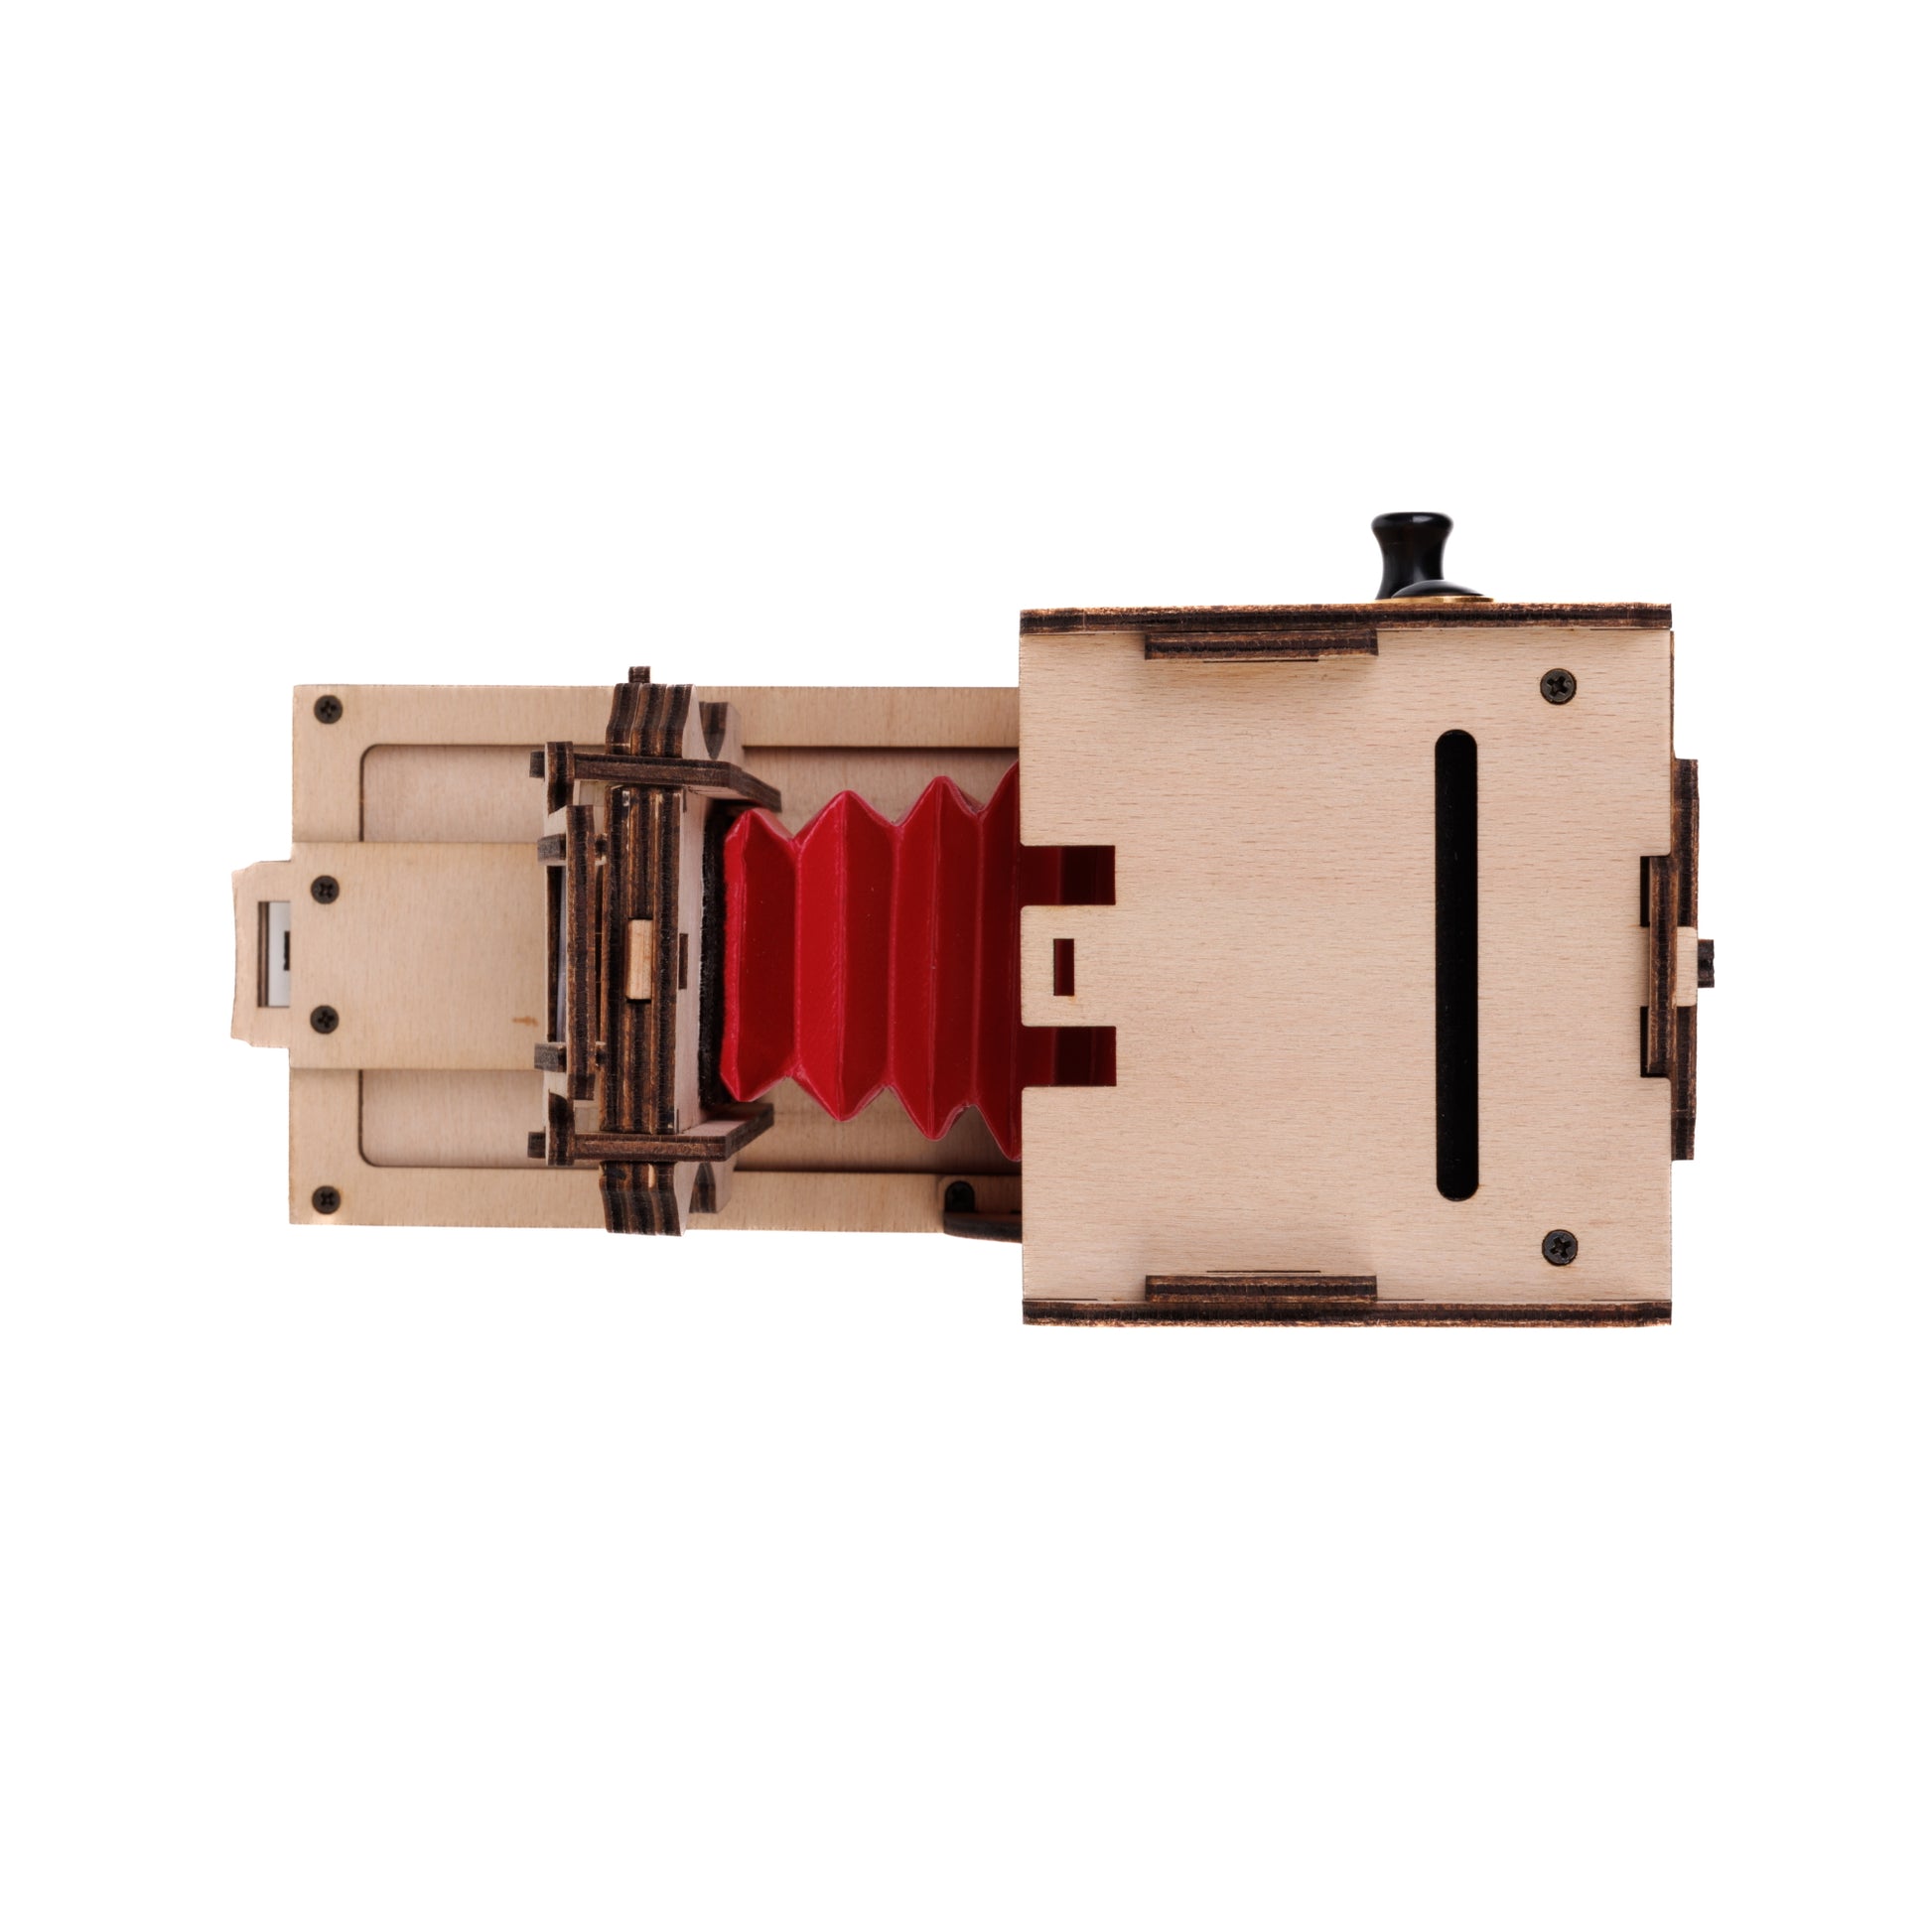 Unfolded Pre-assembled Pinhole Instant Mini Film Camera in Natural wood against white background